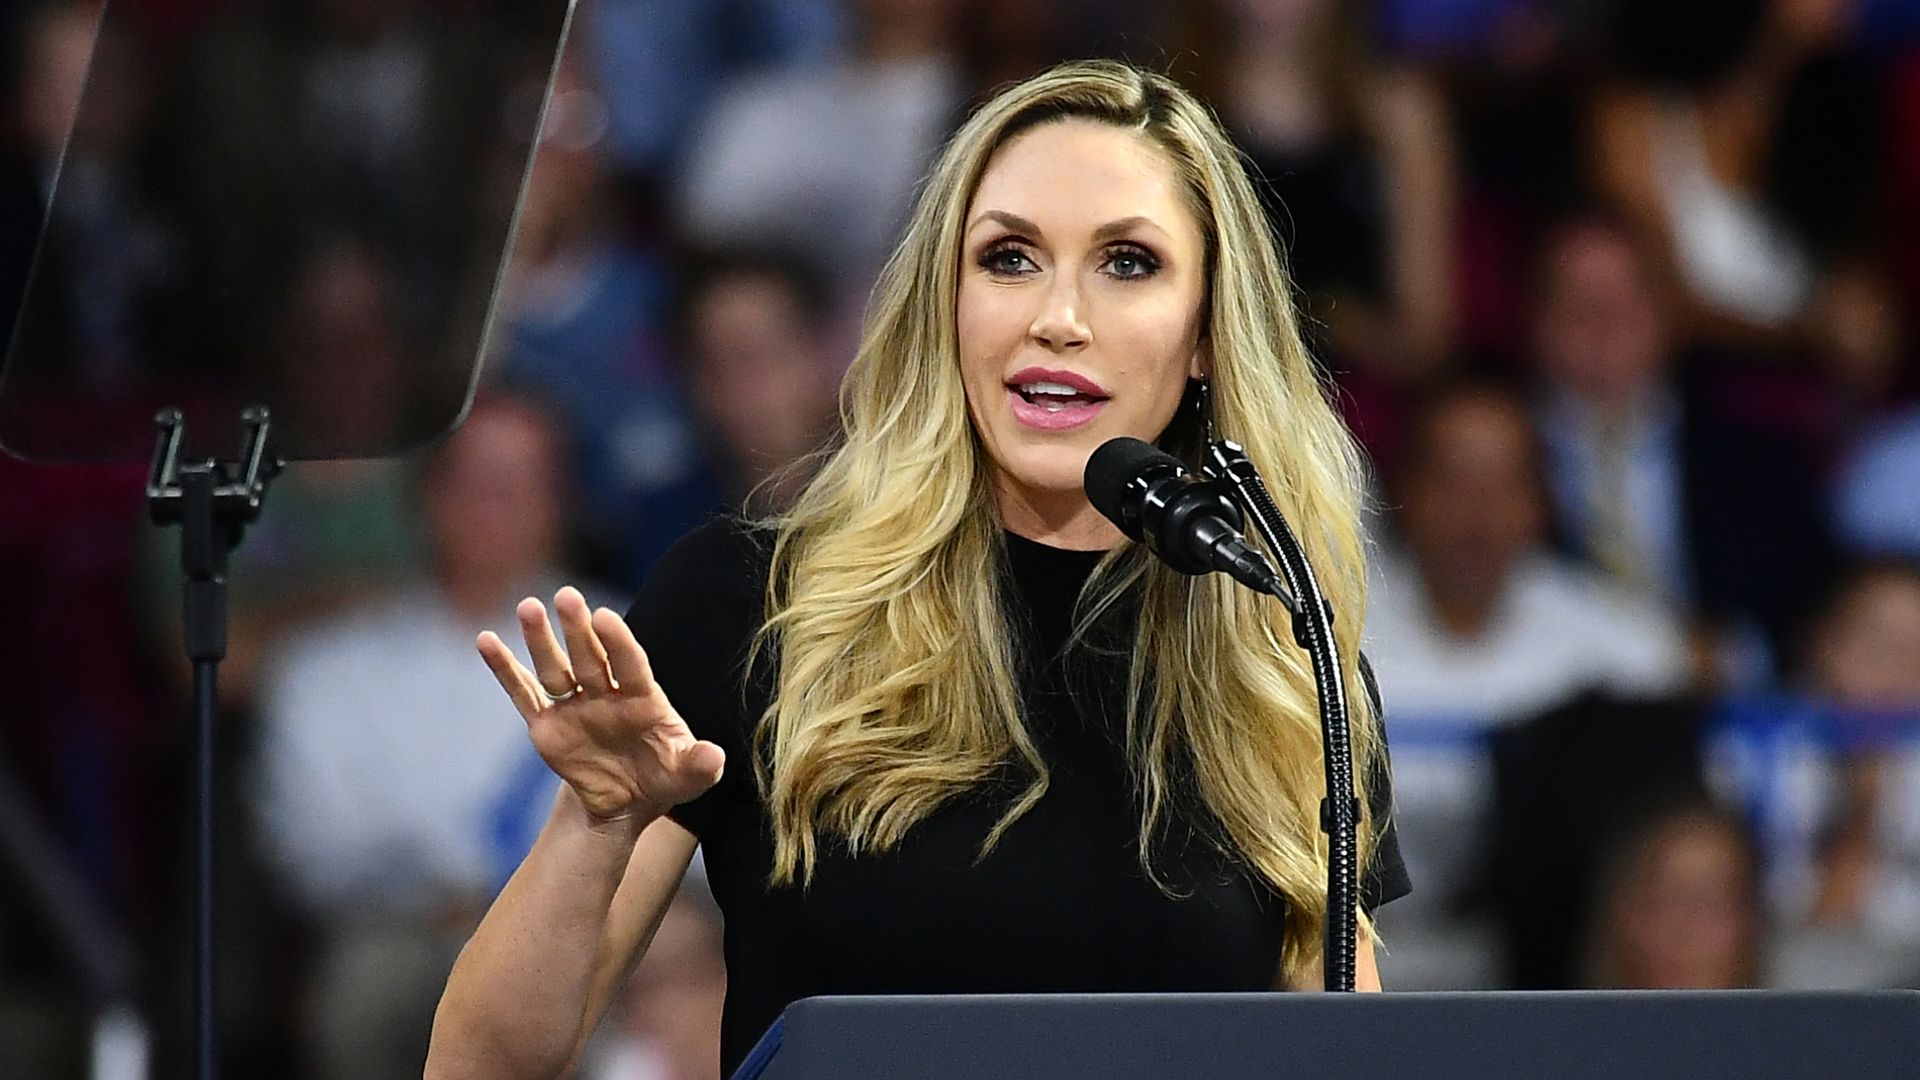 Lara Trump says Democrats looking to unseat the president in 2020 are "succumbing to socialism." 